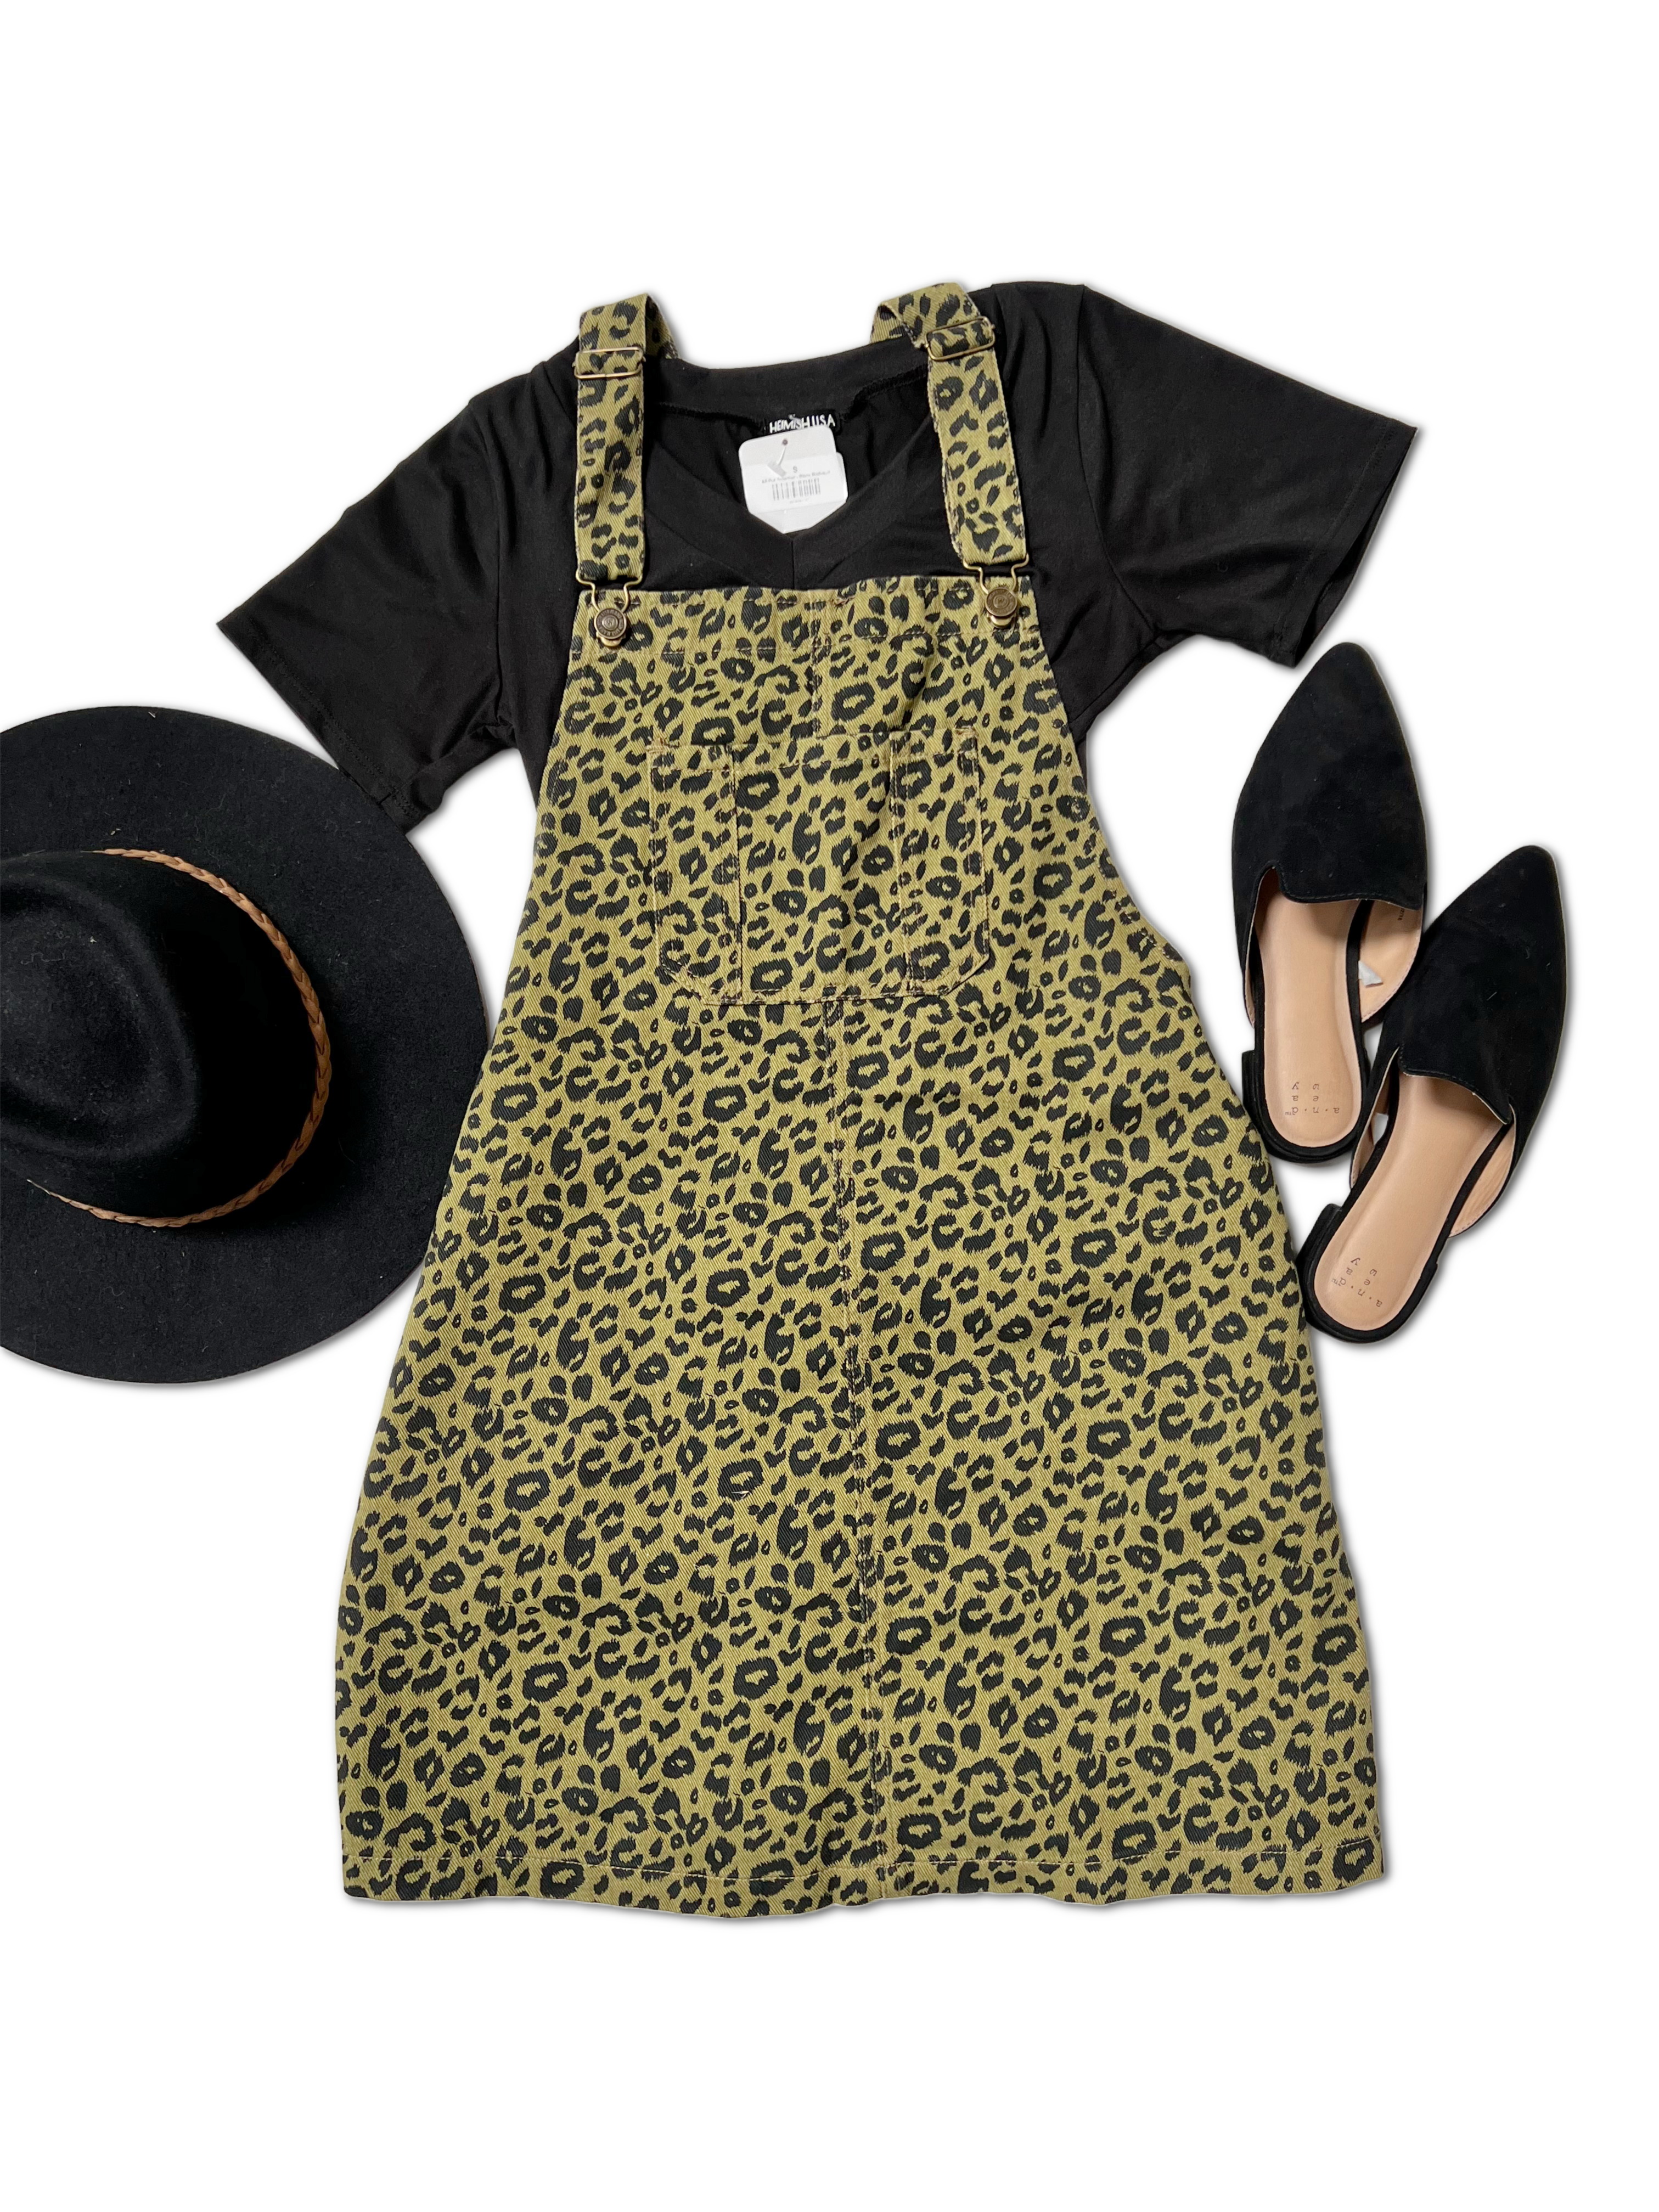 Wishlist A Taste of the Wild Olive Overall Dress OOTD Boutique Simplified